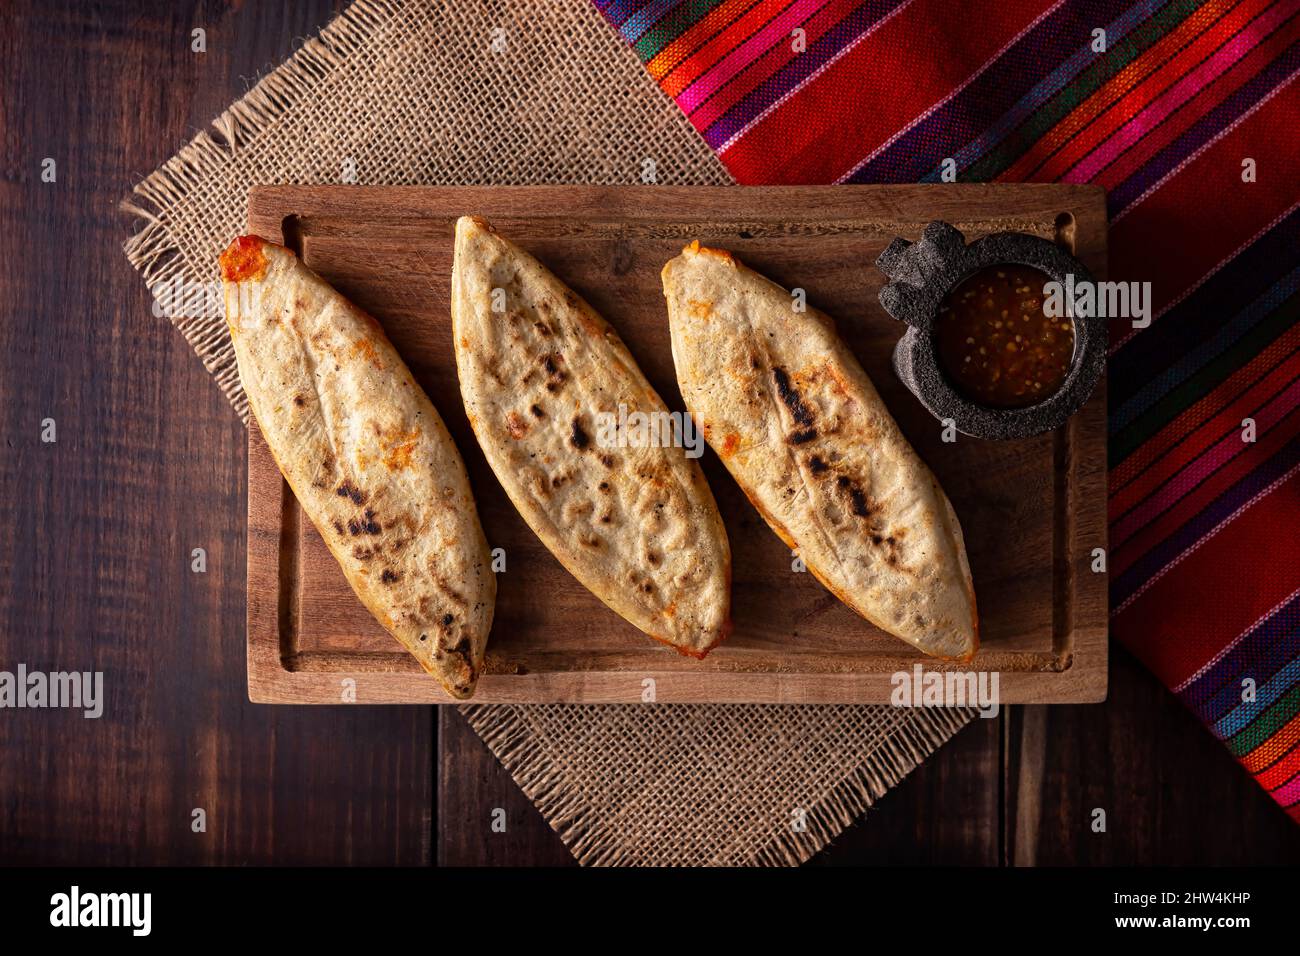 Tlacoyos. Mexican pre hispanic dish made of corn flour patty filled with chicharron prensado (pressed pork rinds). Popular street food in Mexico. Stock Photo